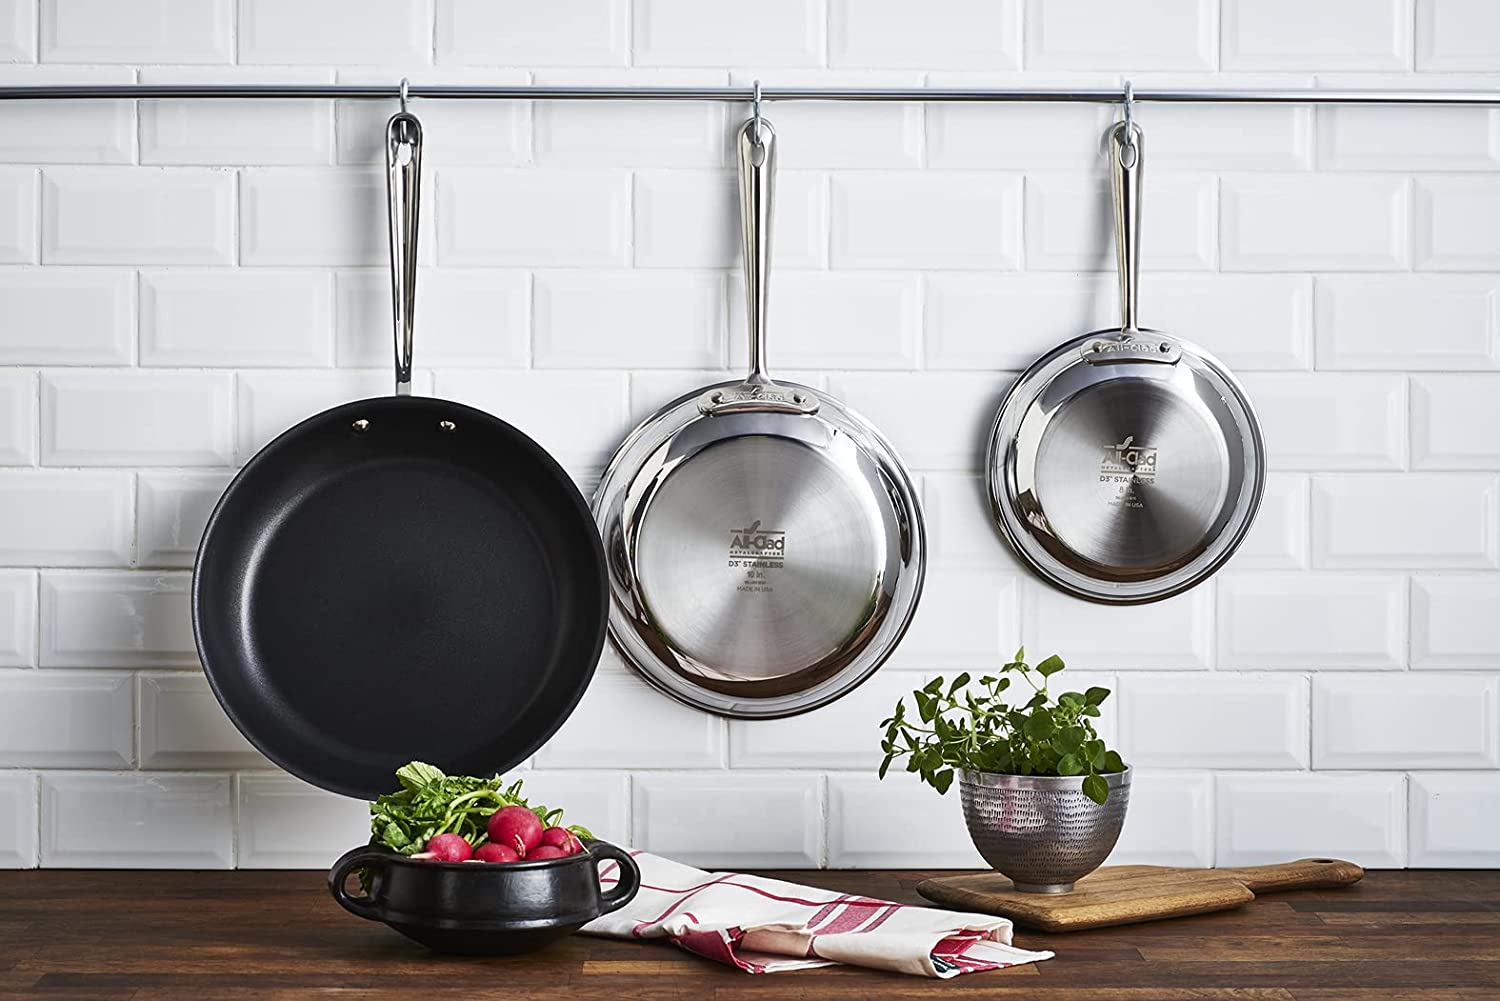 All Clad Non Stick Frying Pan Black Friday Deals